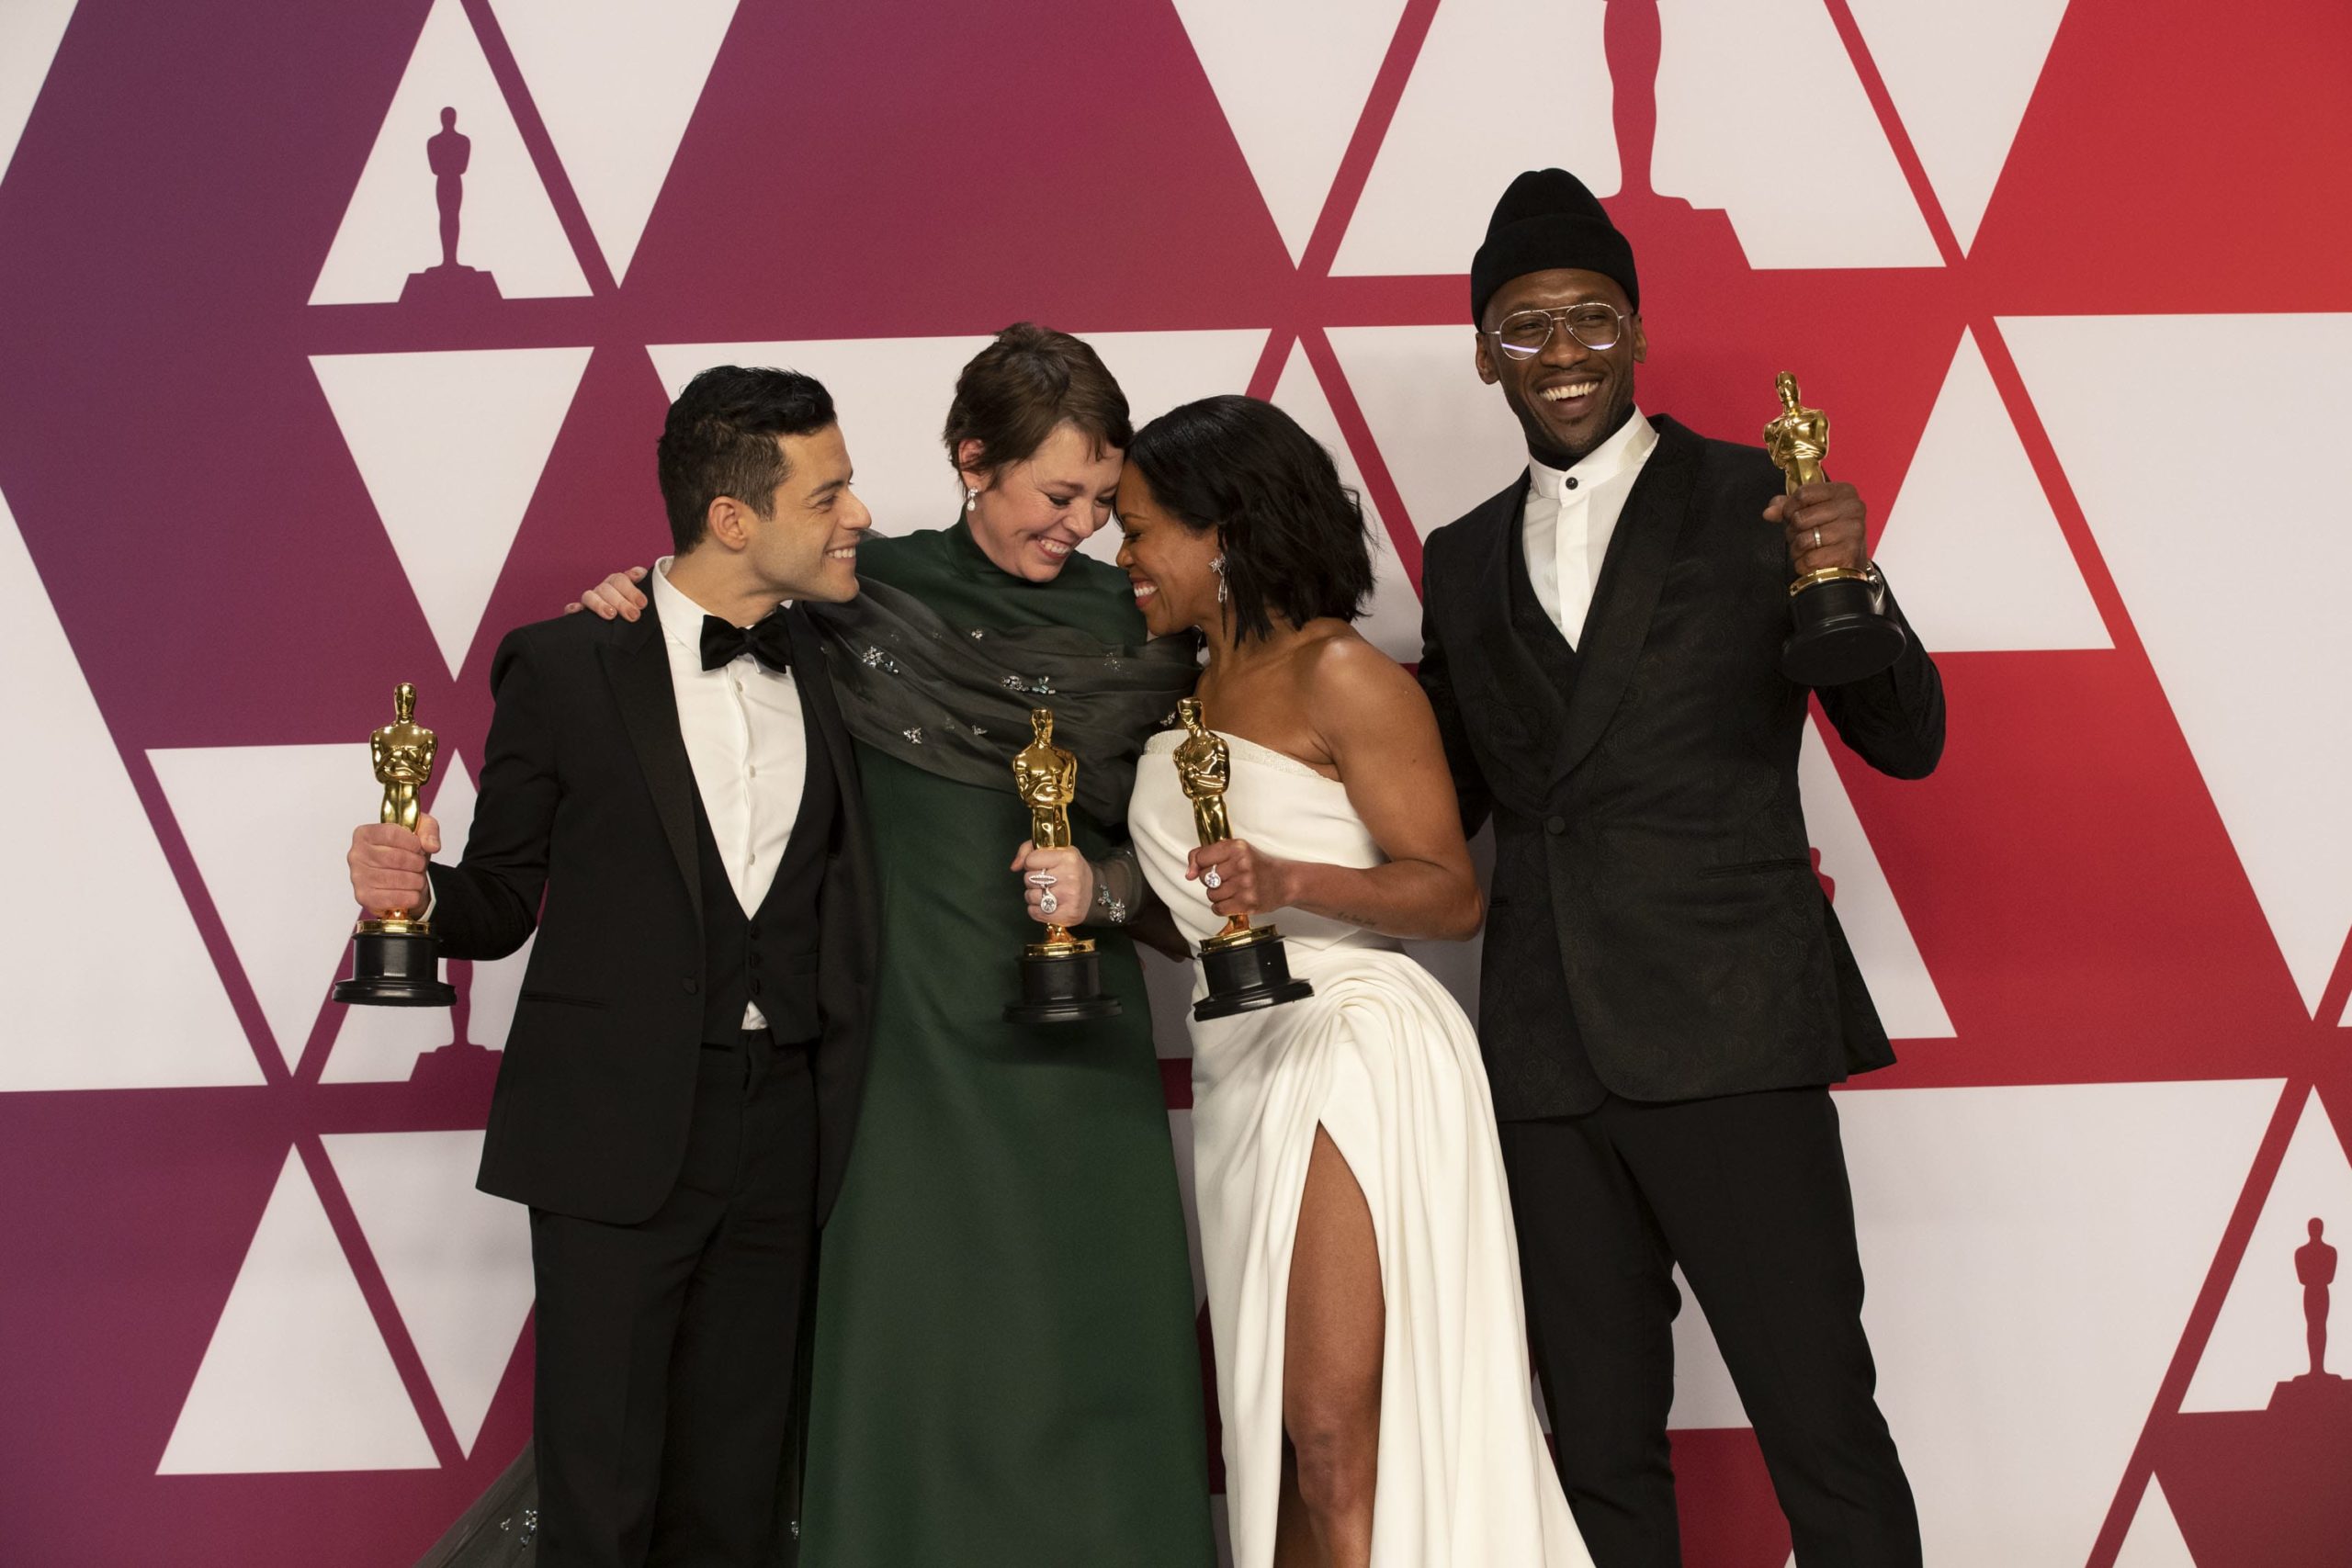 What to anticipate from the 92nd Academy Awards